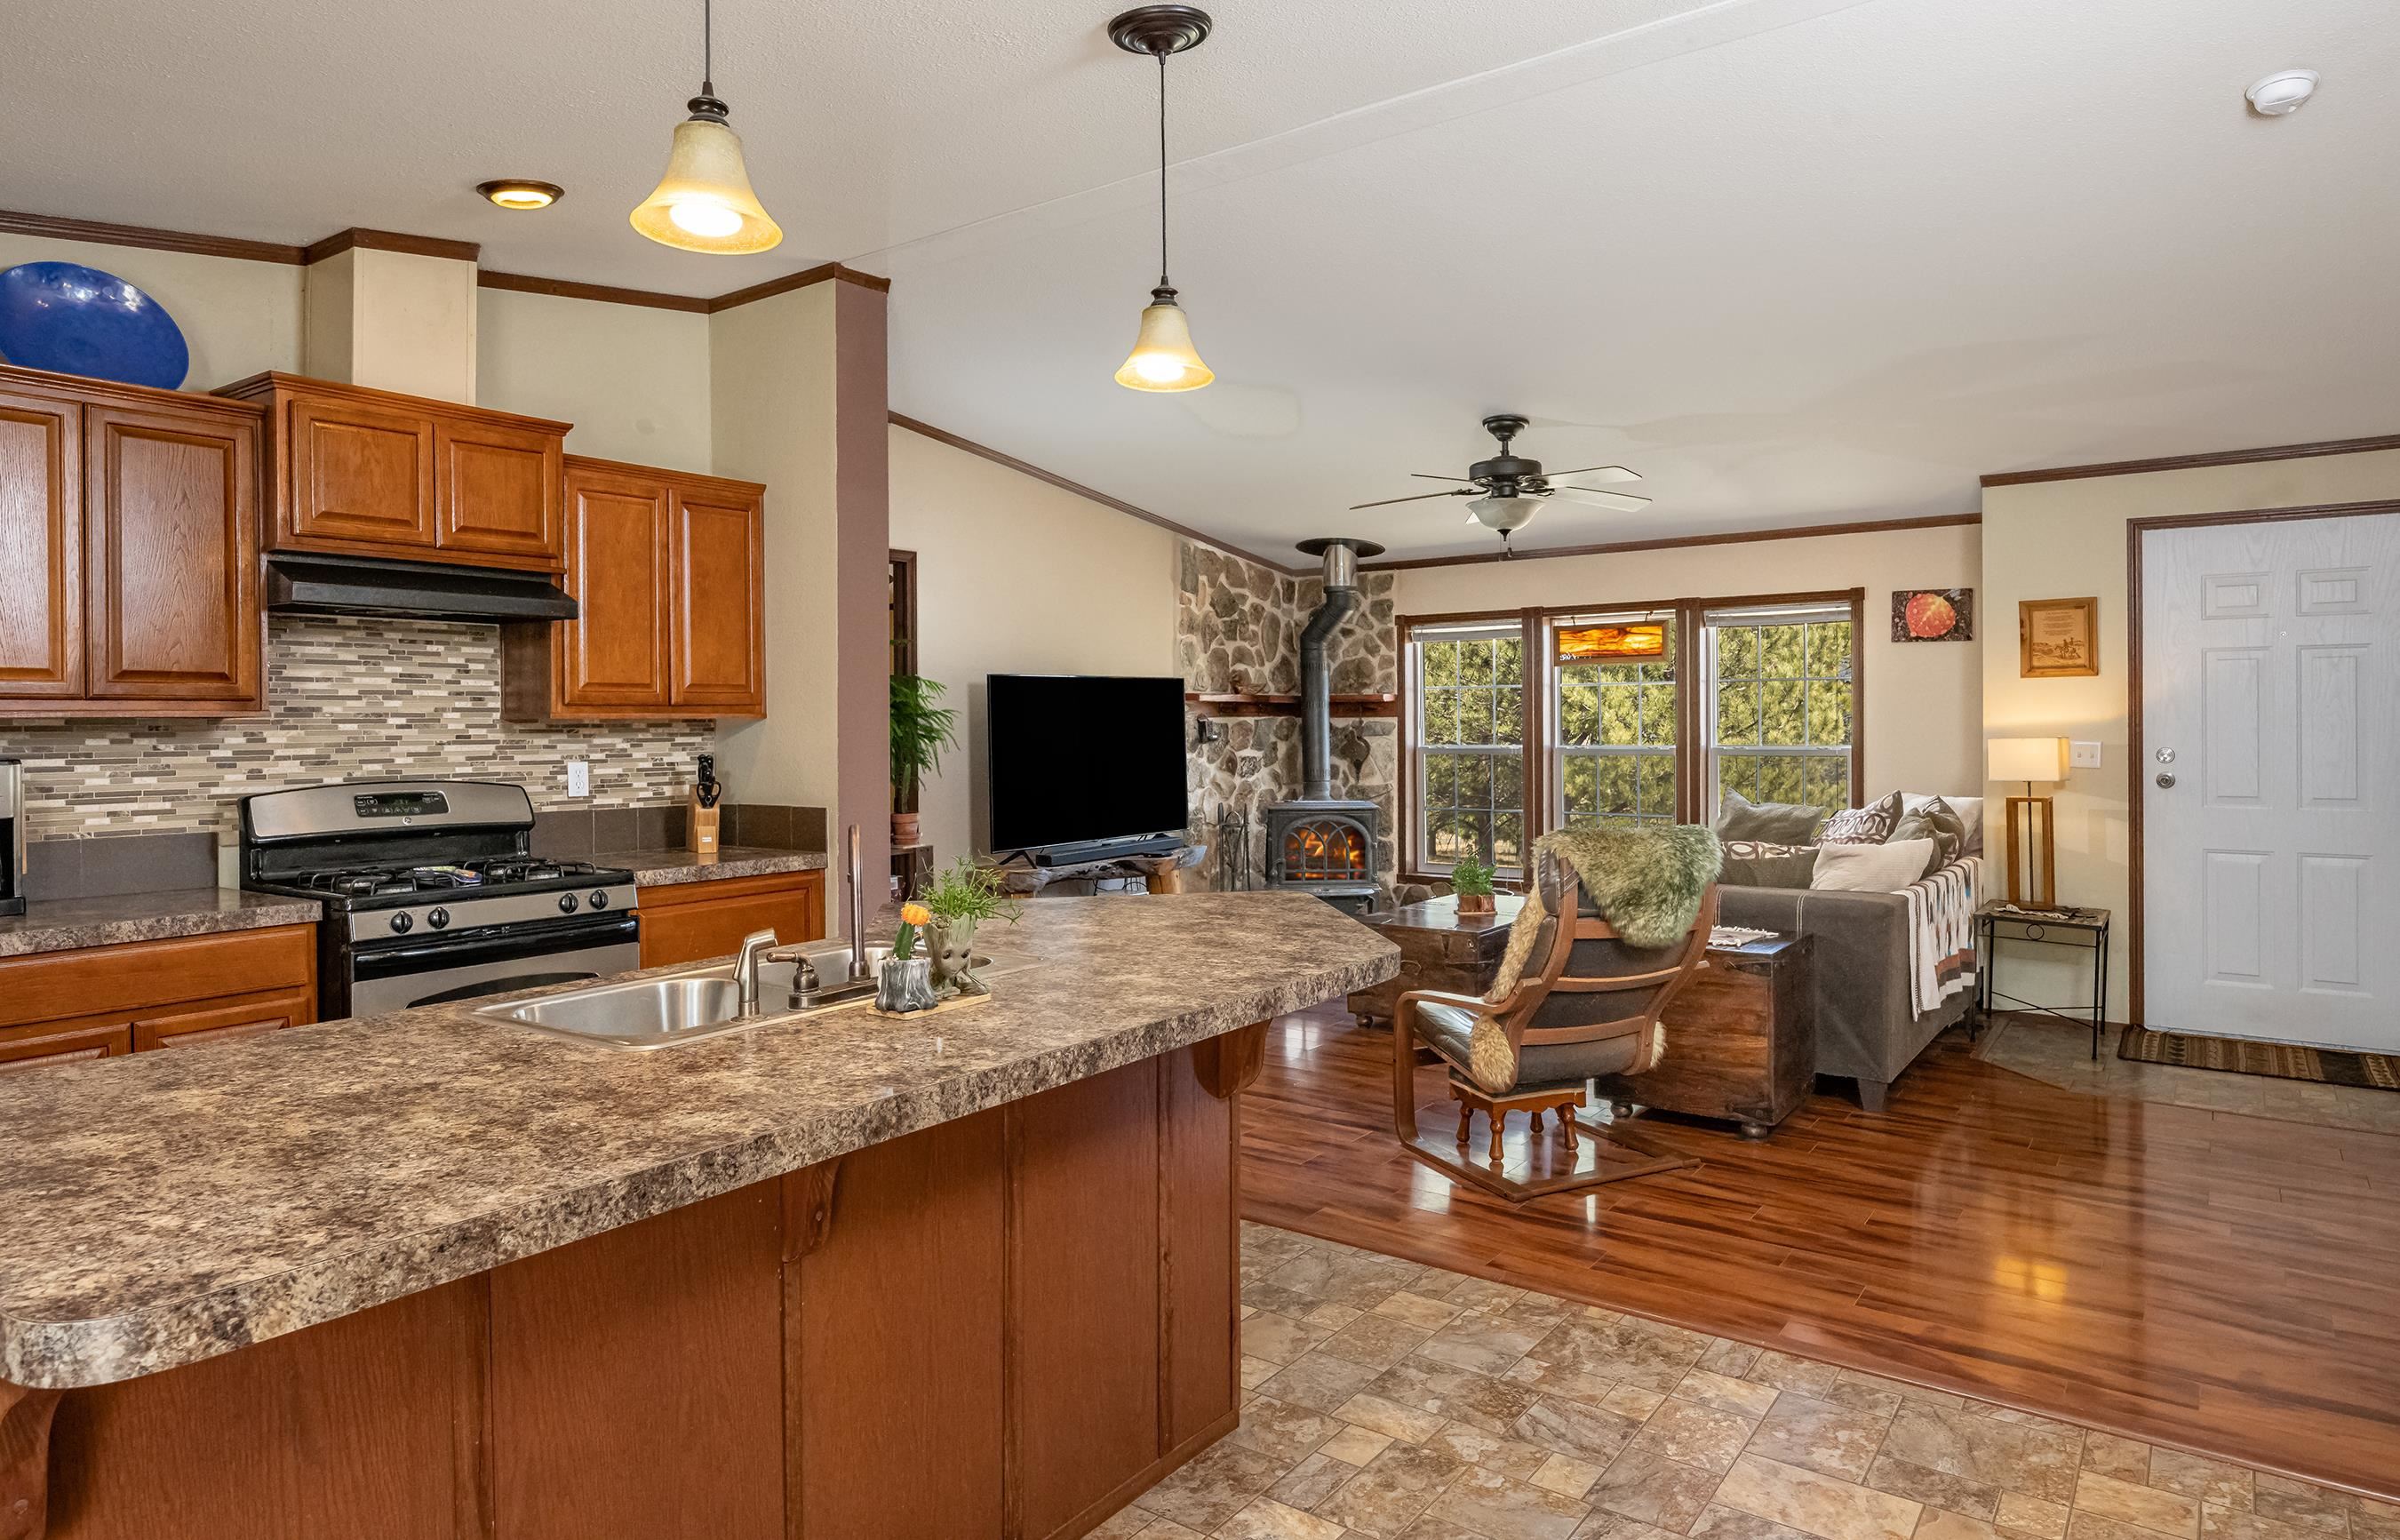 56 Windy Hill Rd, Angel Fire/Eagle Nest, NM 87718